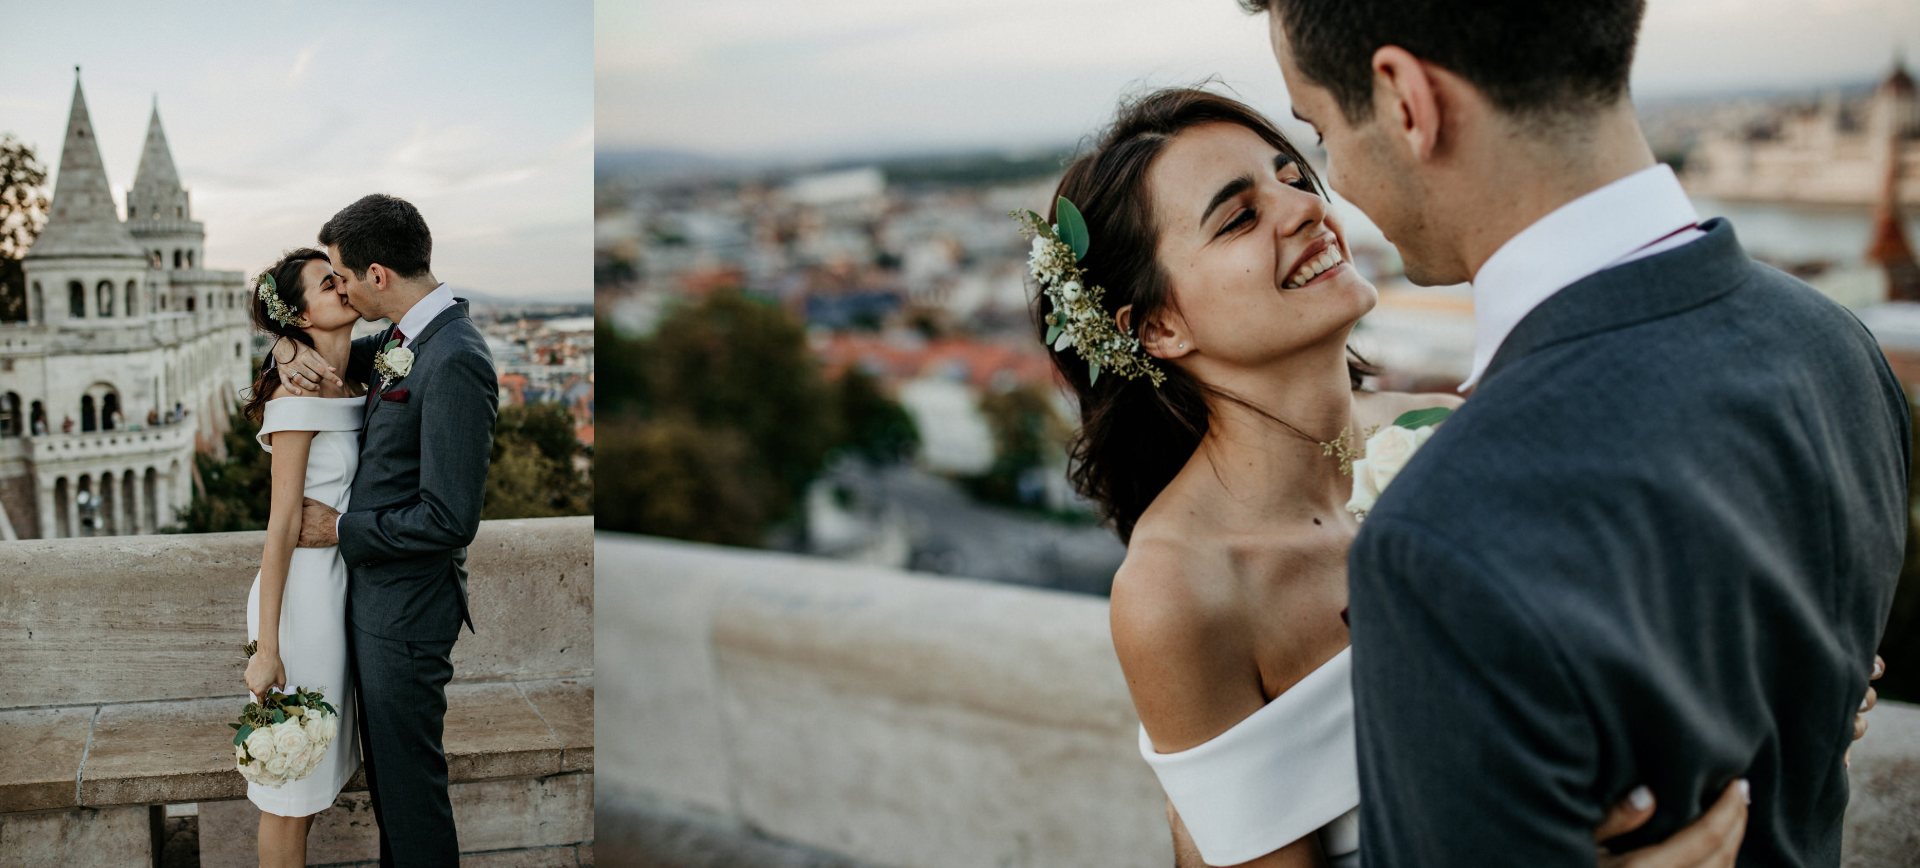 budapest wedding package - elopement in budapest